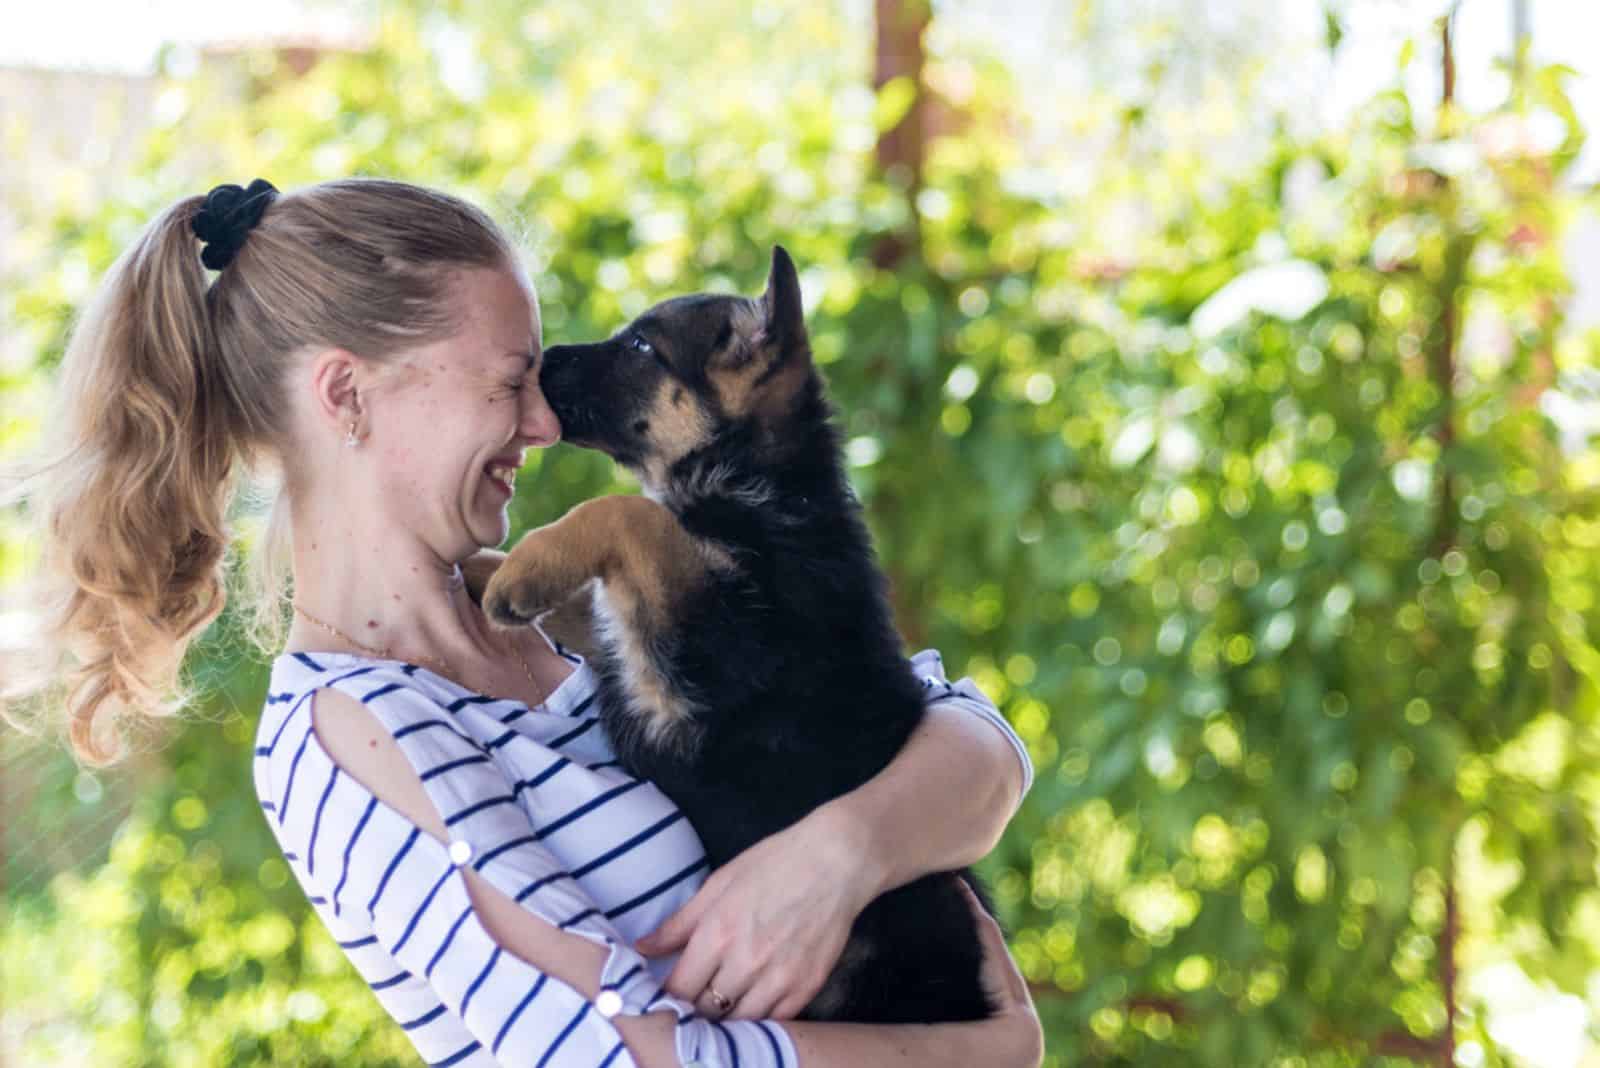 german shepherd puppy rub his face on a woman's face while she holding him